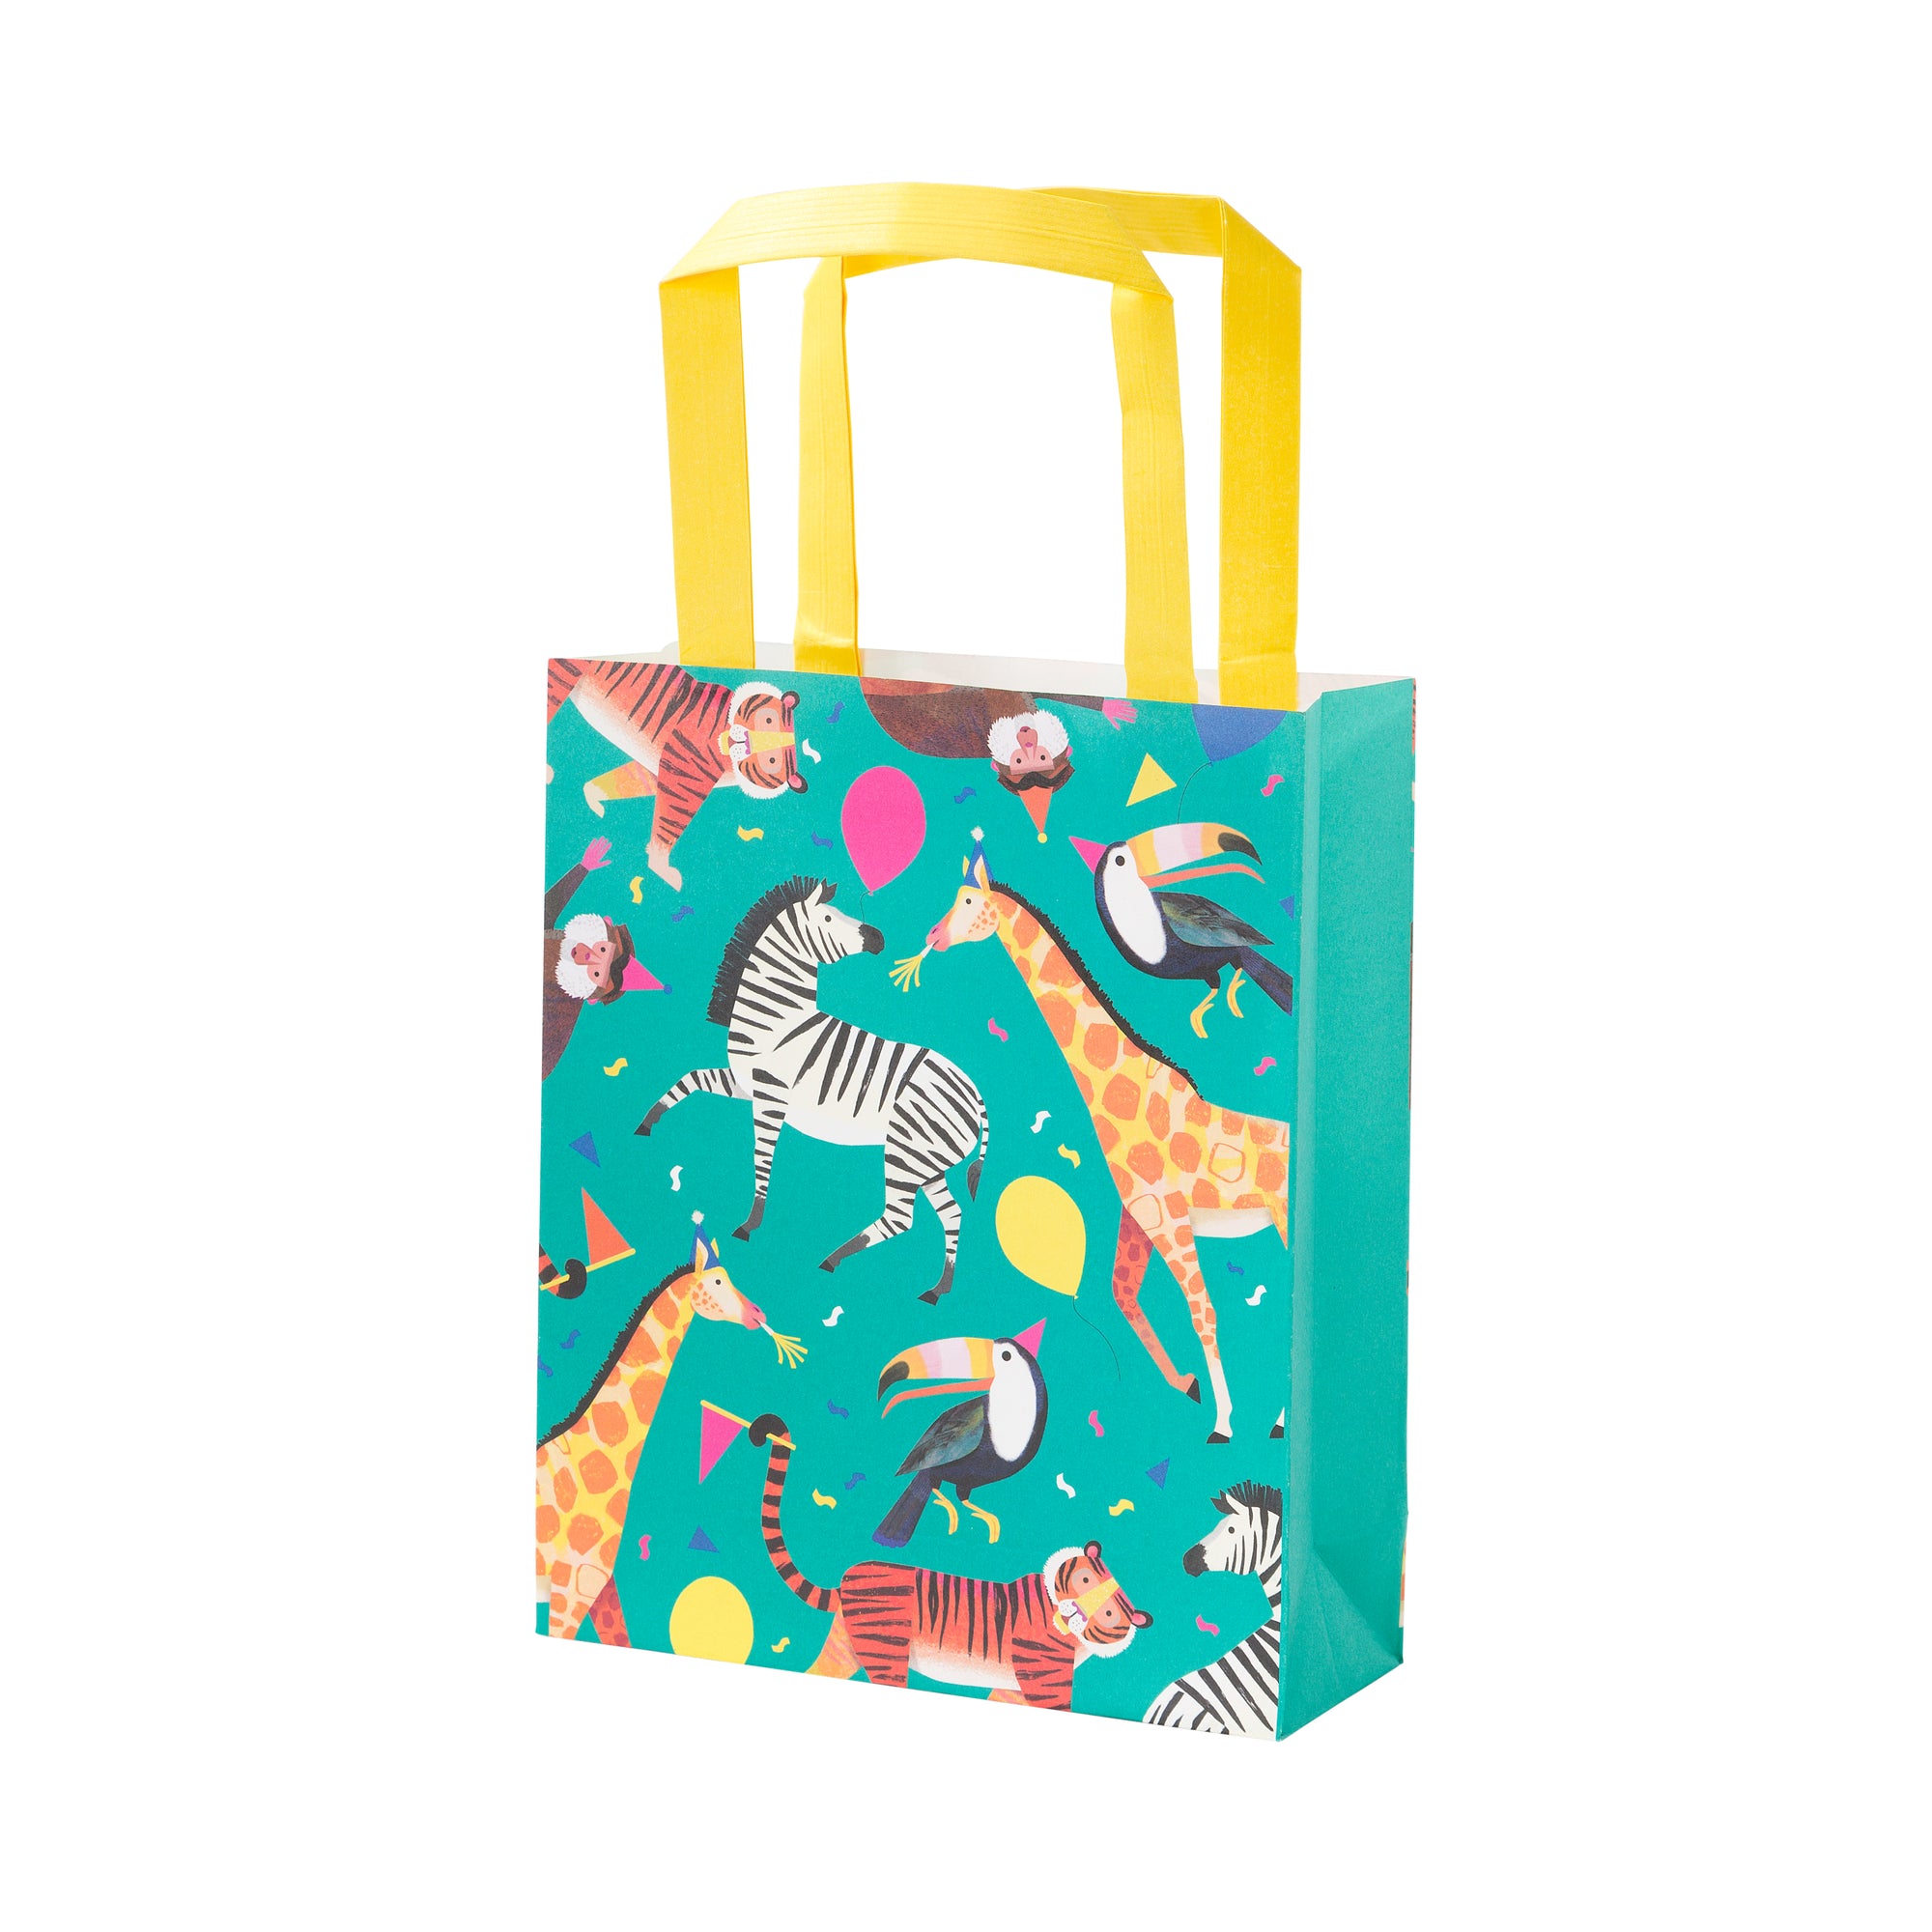 Jungle animal themed party bags. The party bag is decorated with an animal themed pattern on a turquoise background and a yellow handbag.